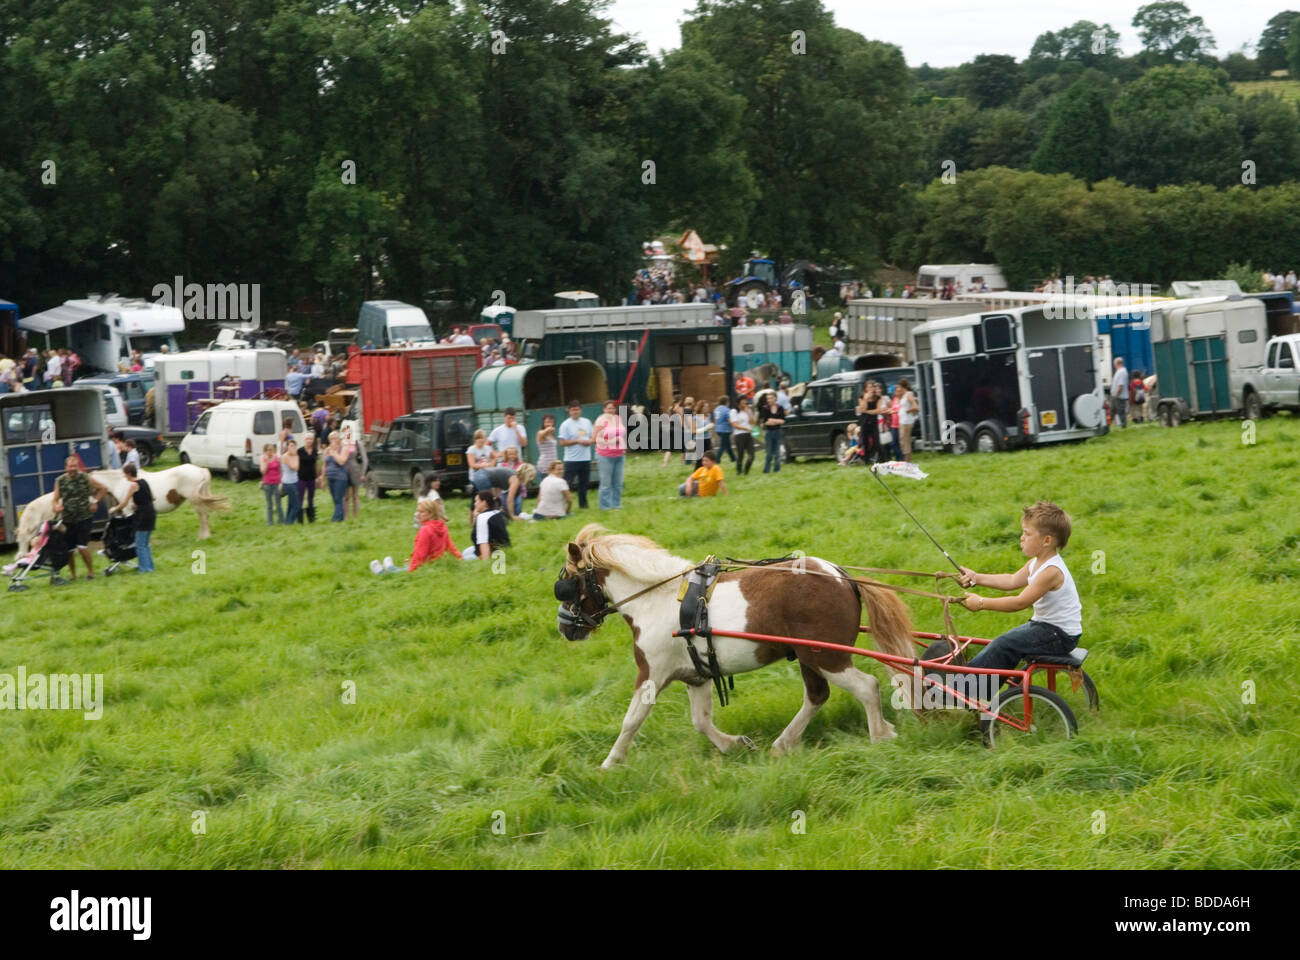 Priddy Horse Fair Mendip Hills, Somerset Uk  Young boy trotting using a Shetland Pony pulling a horse cart. 2000s HOMER SYKES Stock Photo